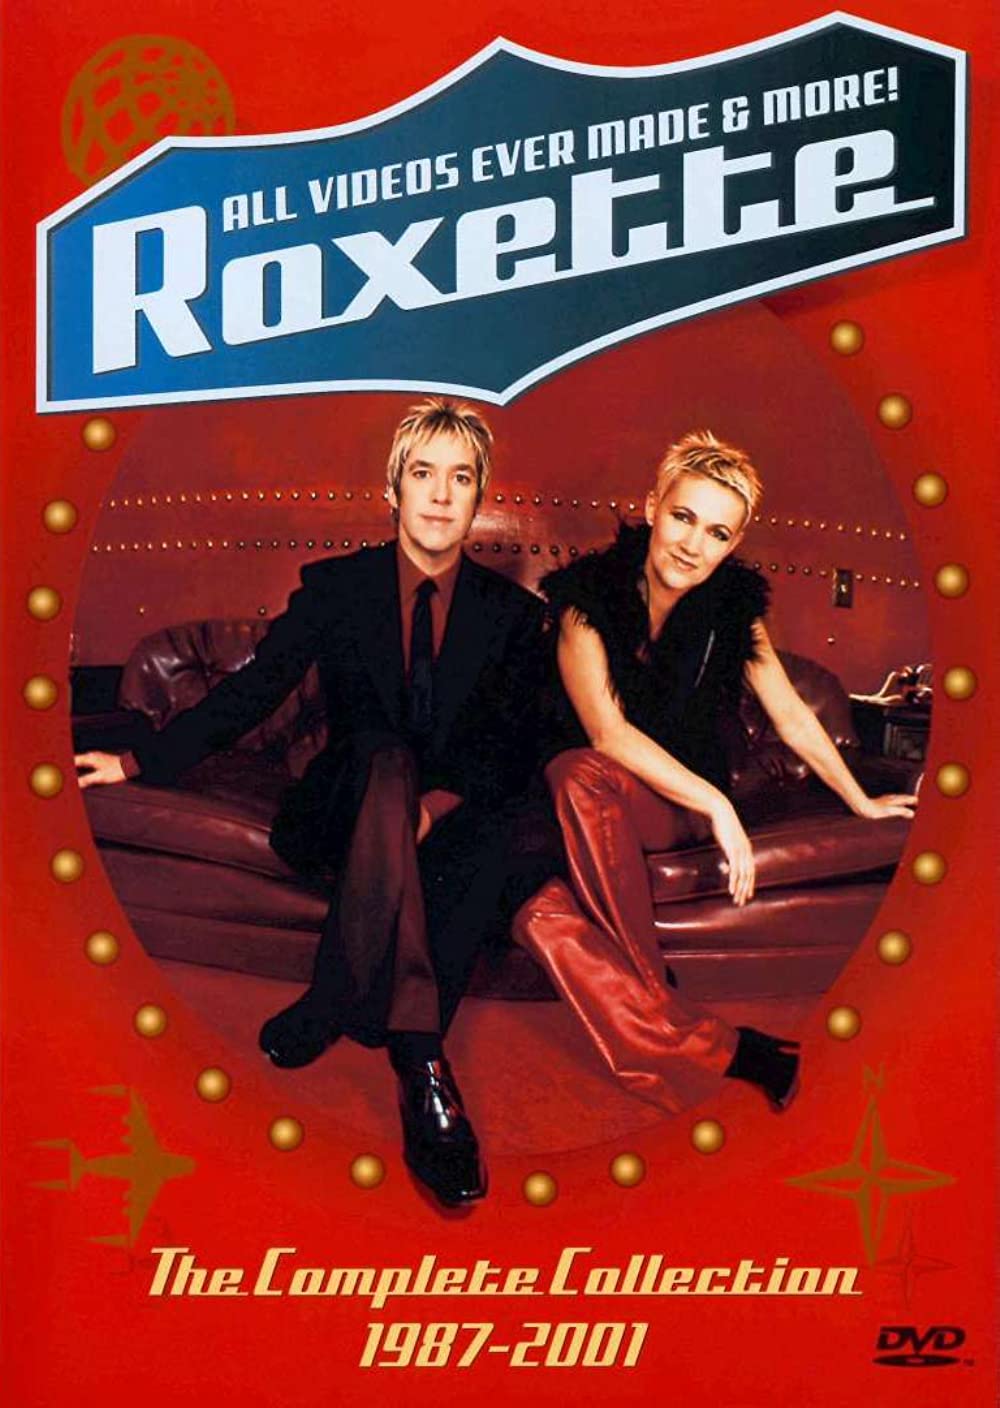 Roxette All Videos Ever Made & More. The Complete Collection 1987-2001